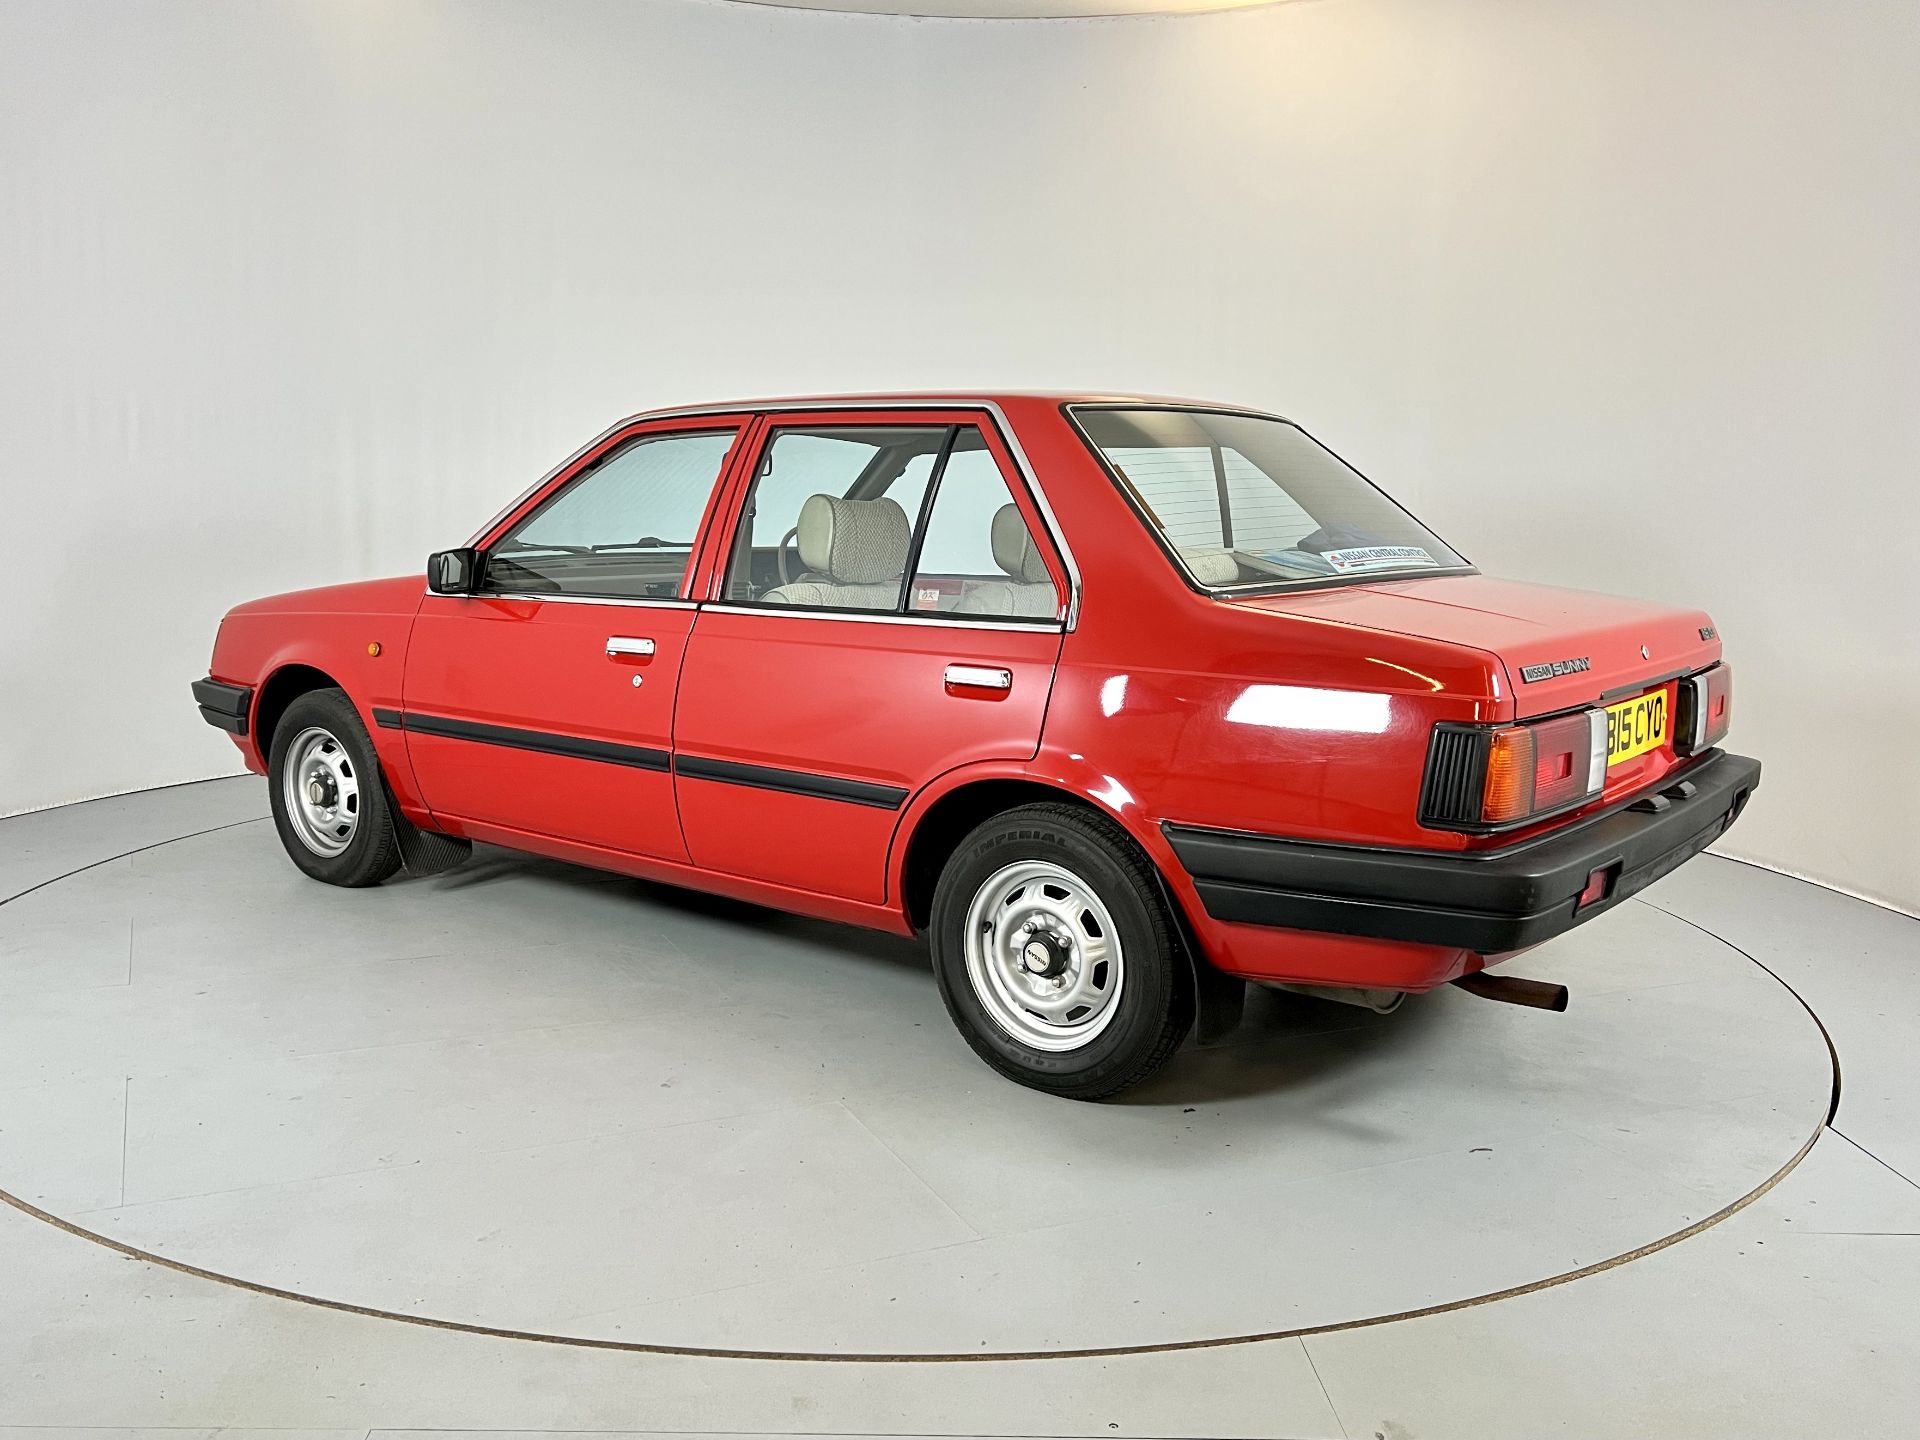 Nissan Sunny - Image 6 of 35